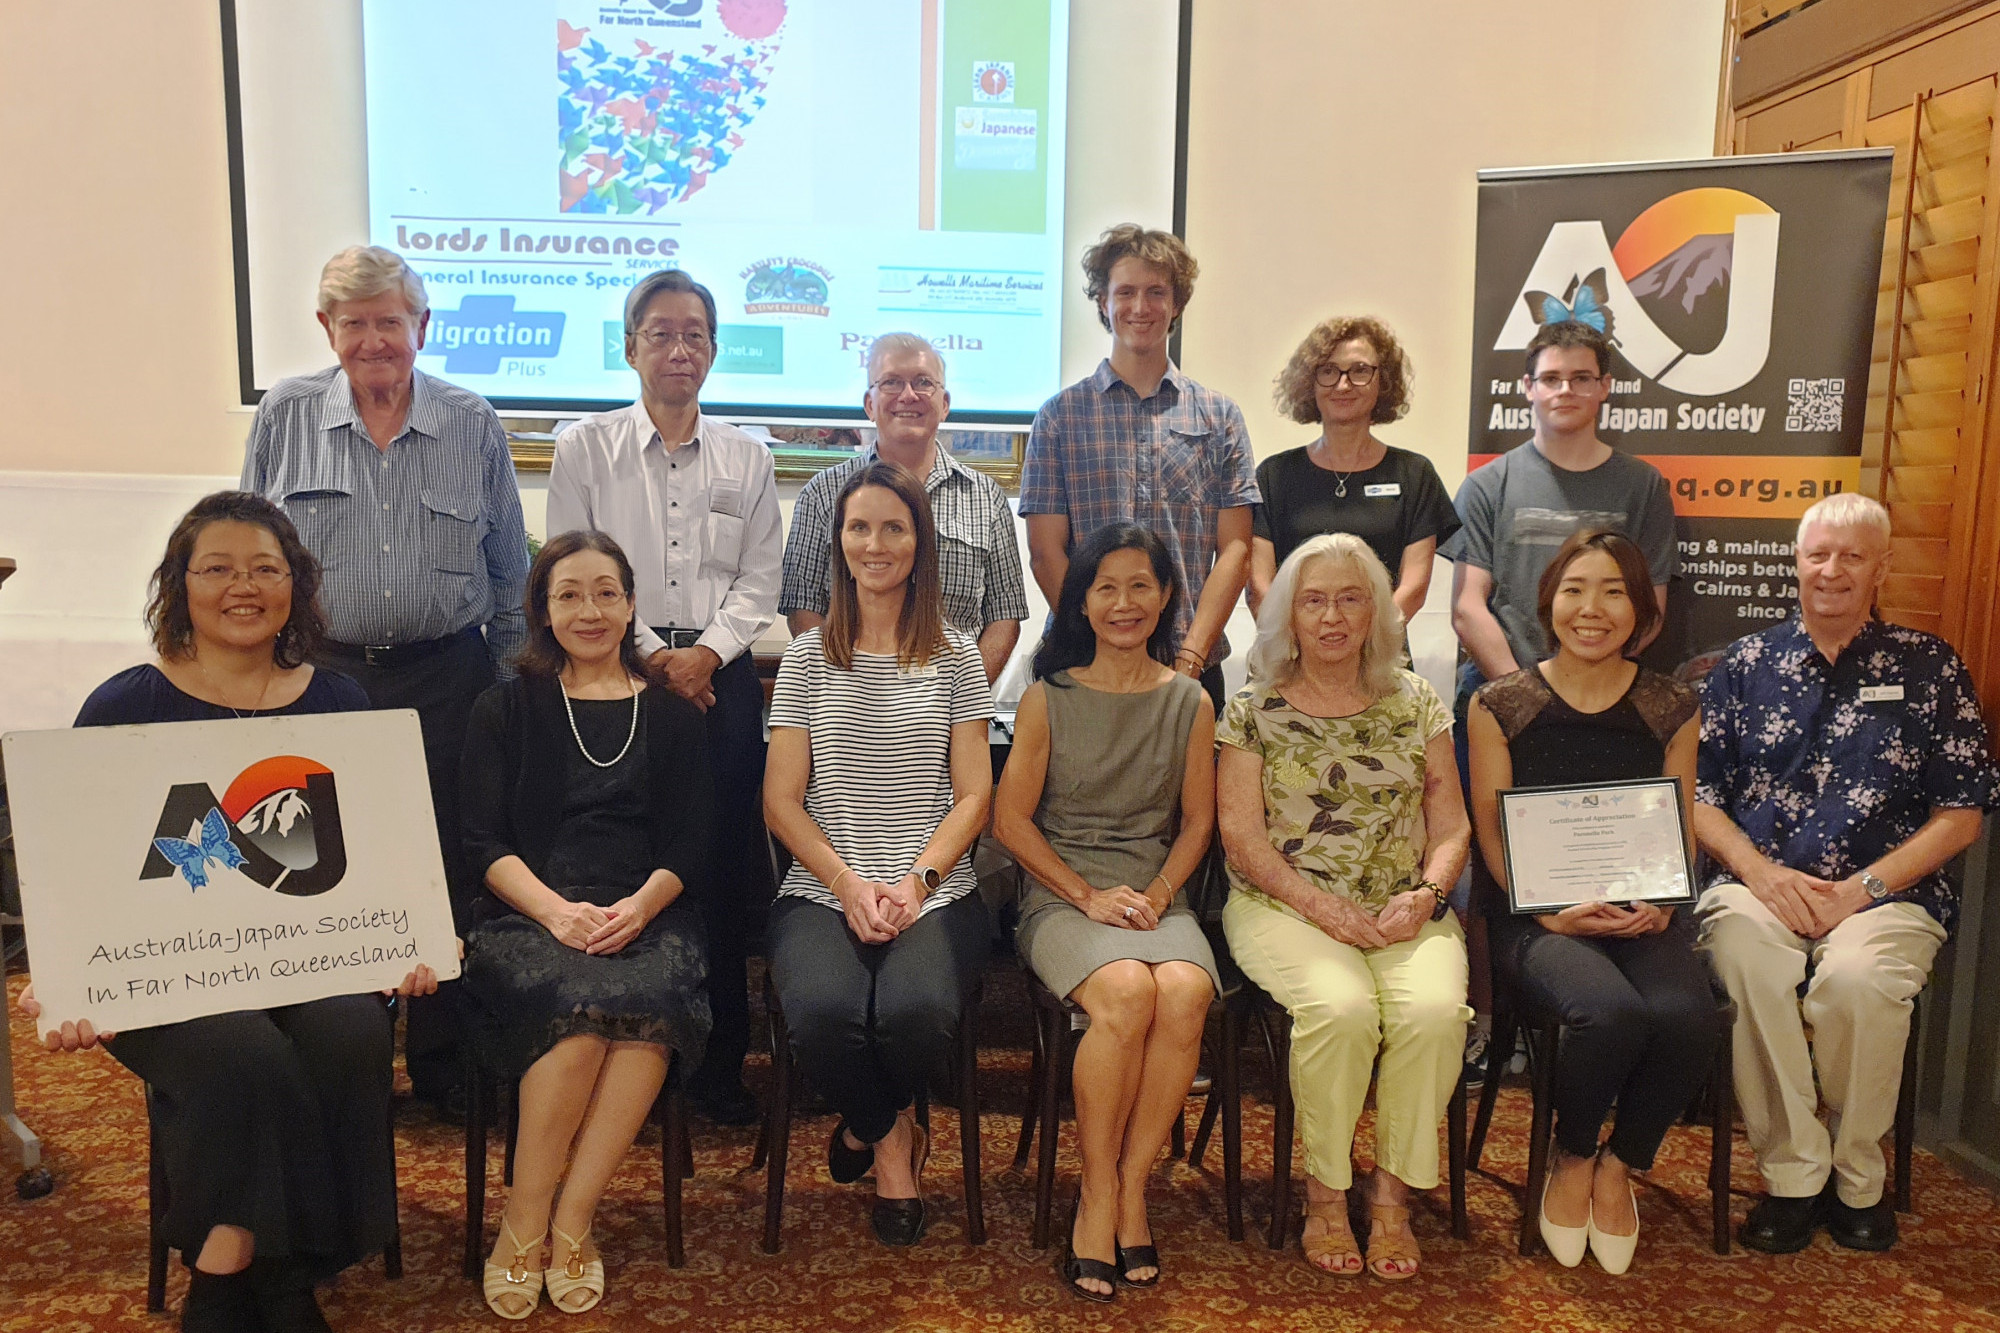 Nick von Dietze and Zachary Downey, who received scholarships to travel to Japan (back row, fourth and sixth from left) with ASJ members and sponsors